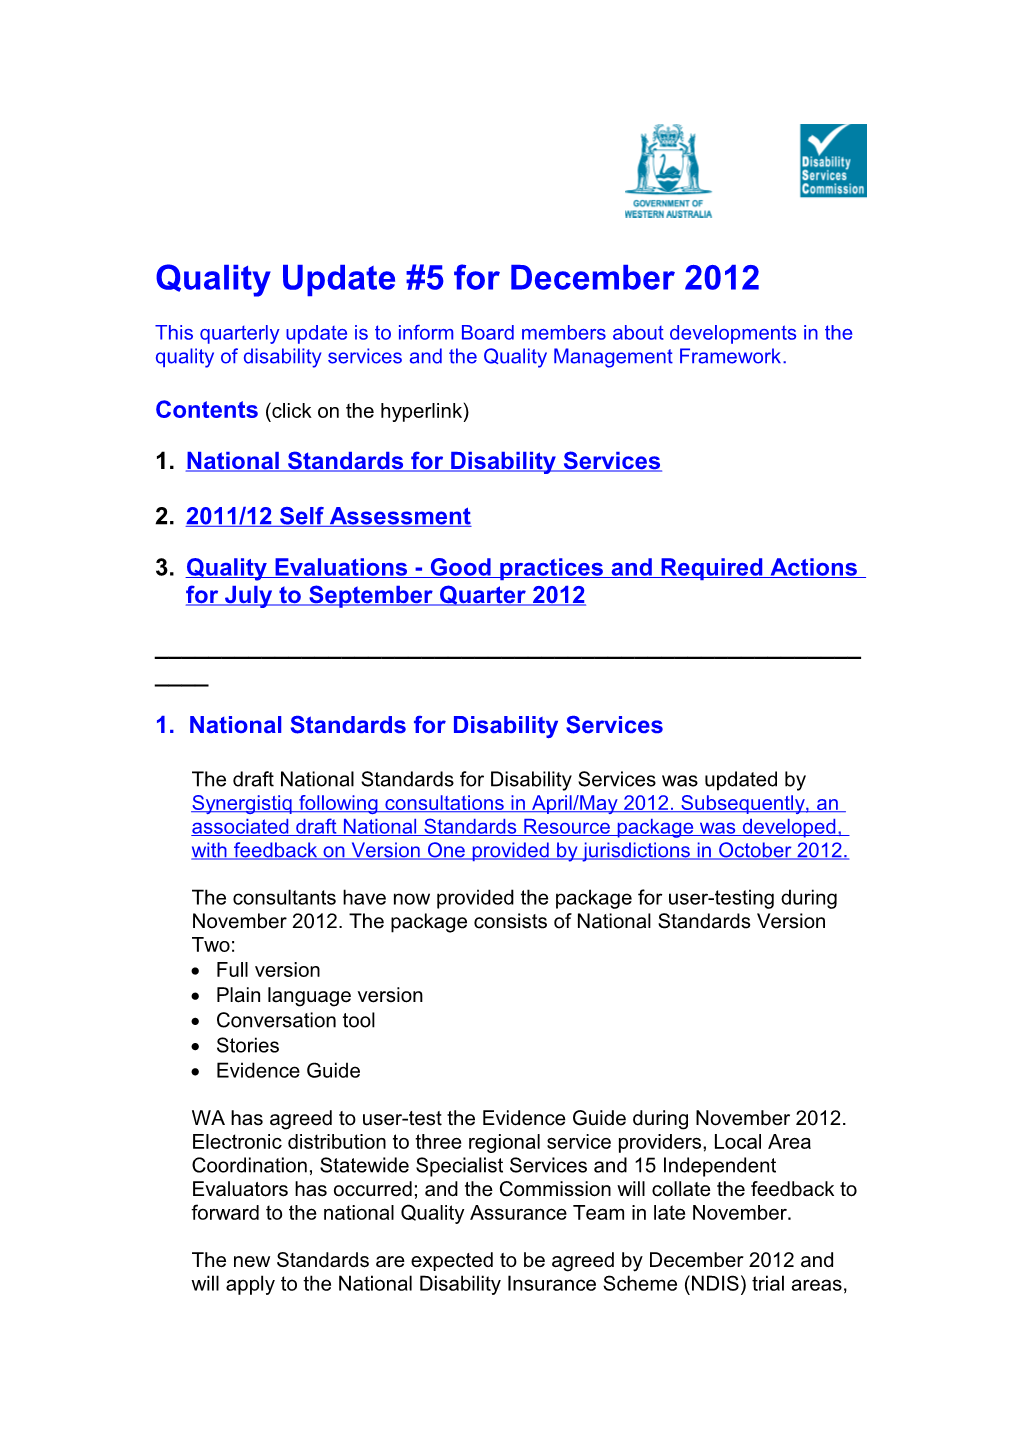 Quality Update #5 for December 2012